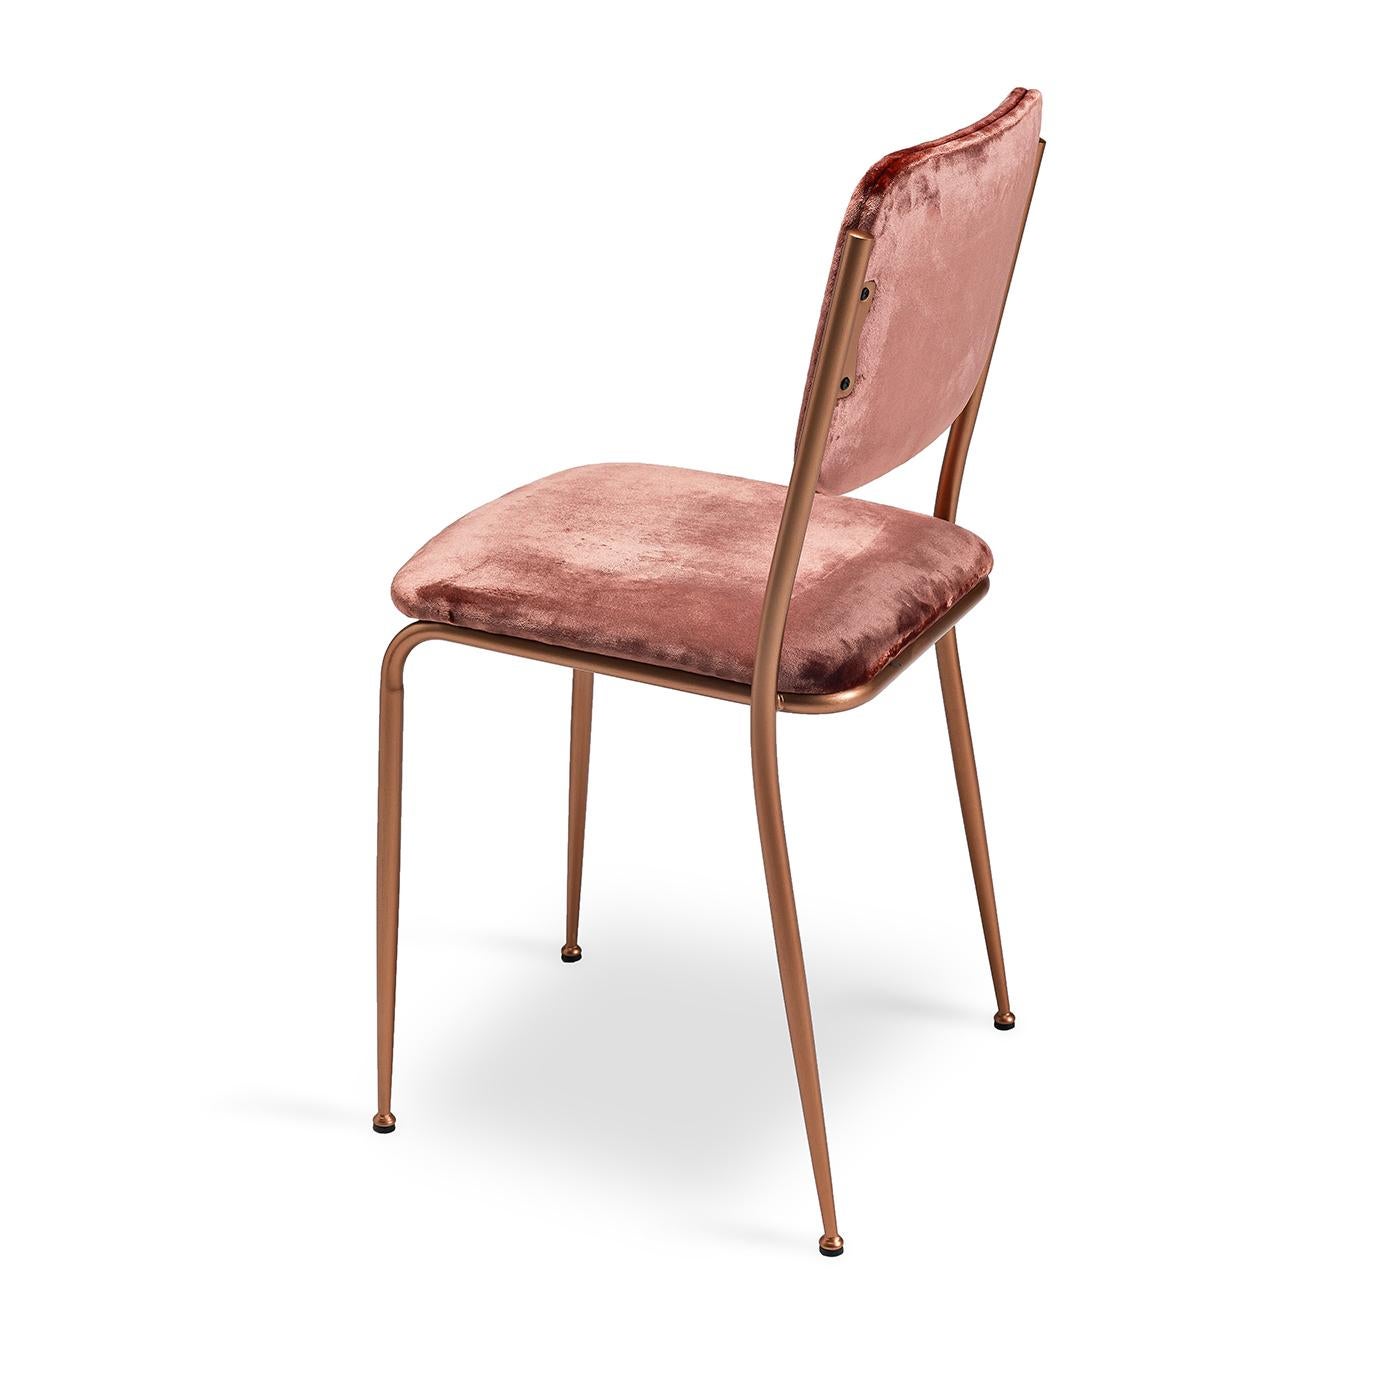 Use this cute little vintage-inspired dining chair to spice up any dining room. The seat and back are both upholstered in a blush-colored velvet, while the back and seat are structured with polyurethane and curved wood inserts for comfort. The